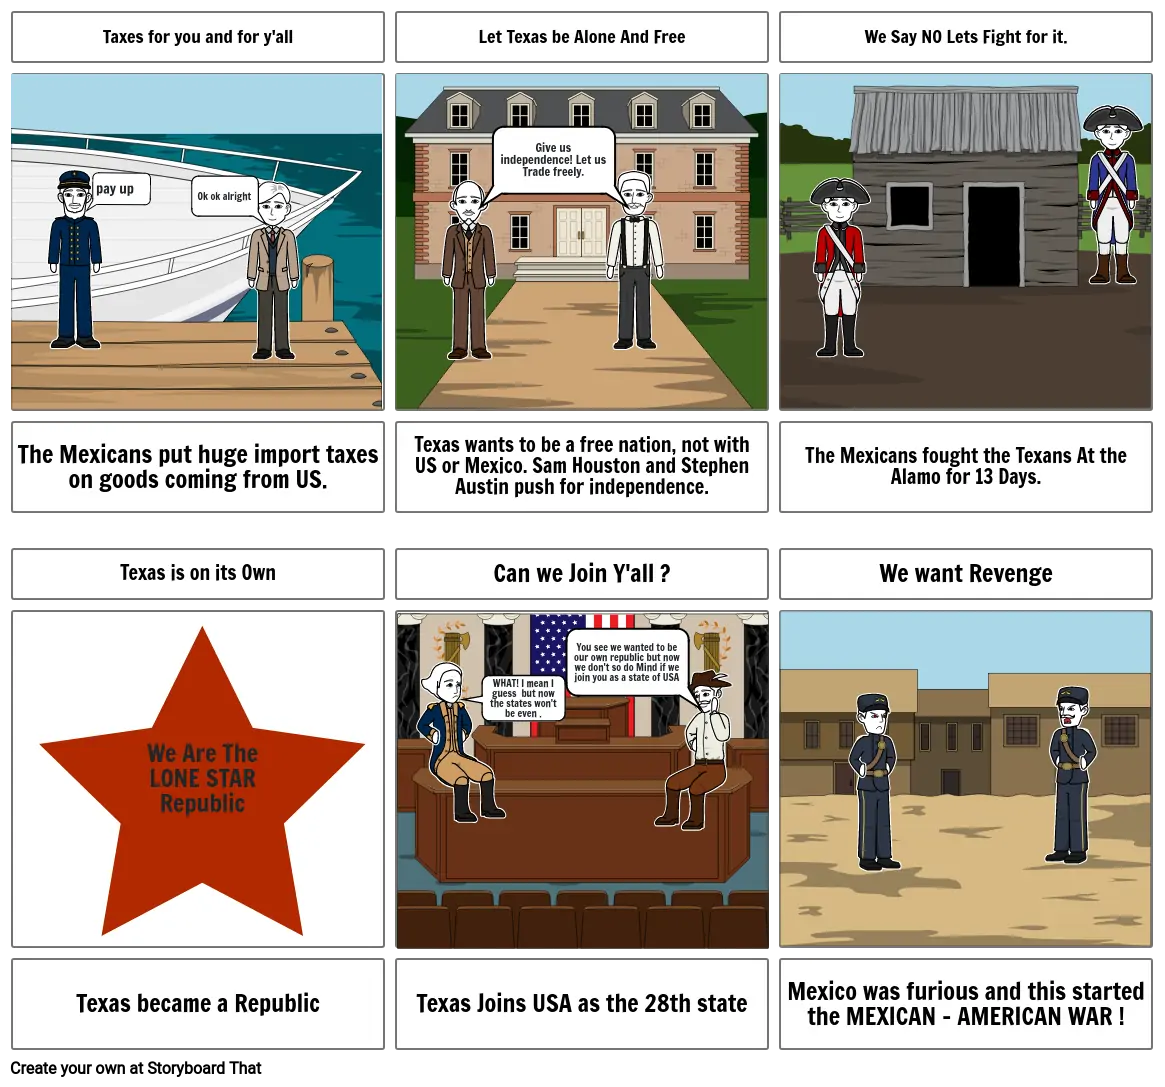 HOW THE MEXICAN - AMERICAN WAR STARTED